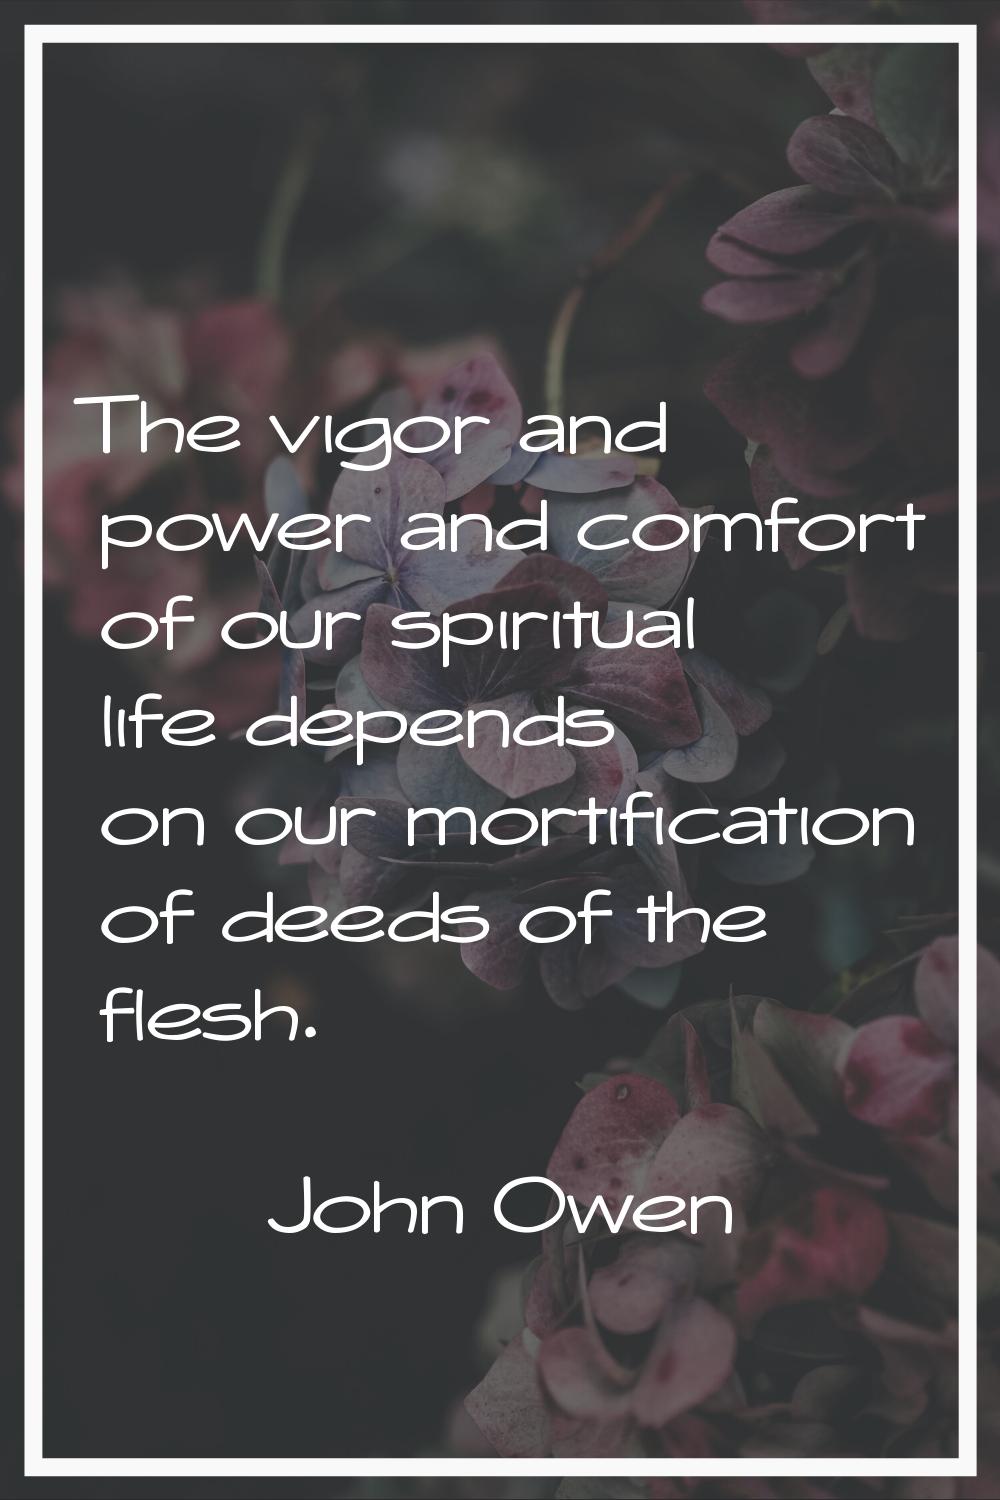 The vigor and power and comfort of our spiritual life depends on our mortification of deeds of the 